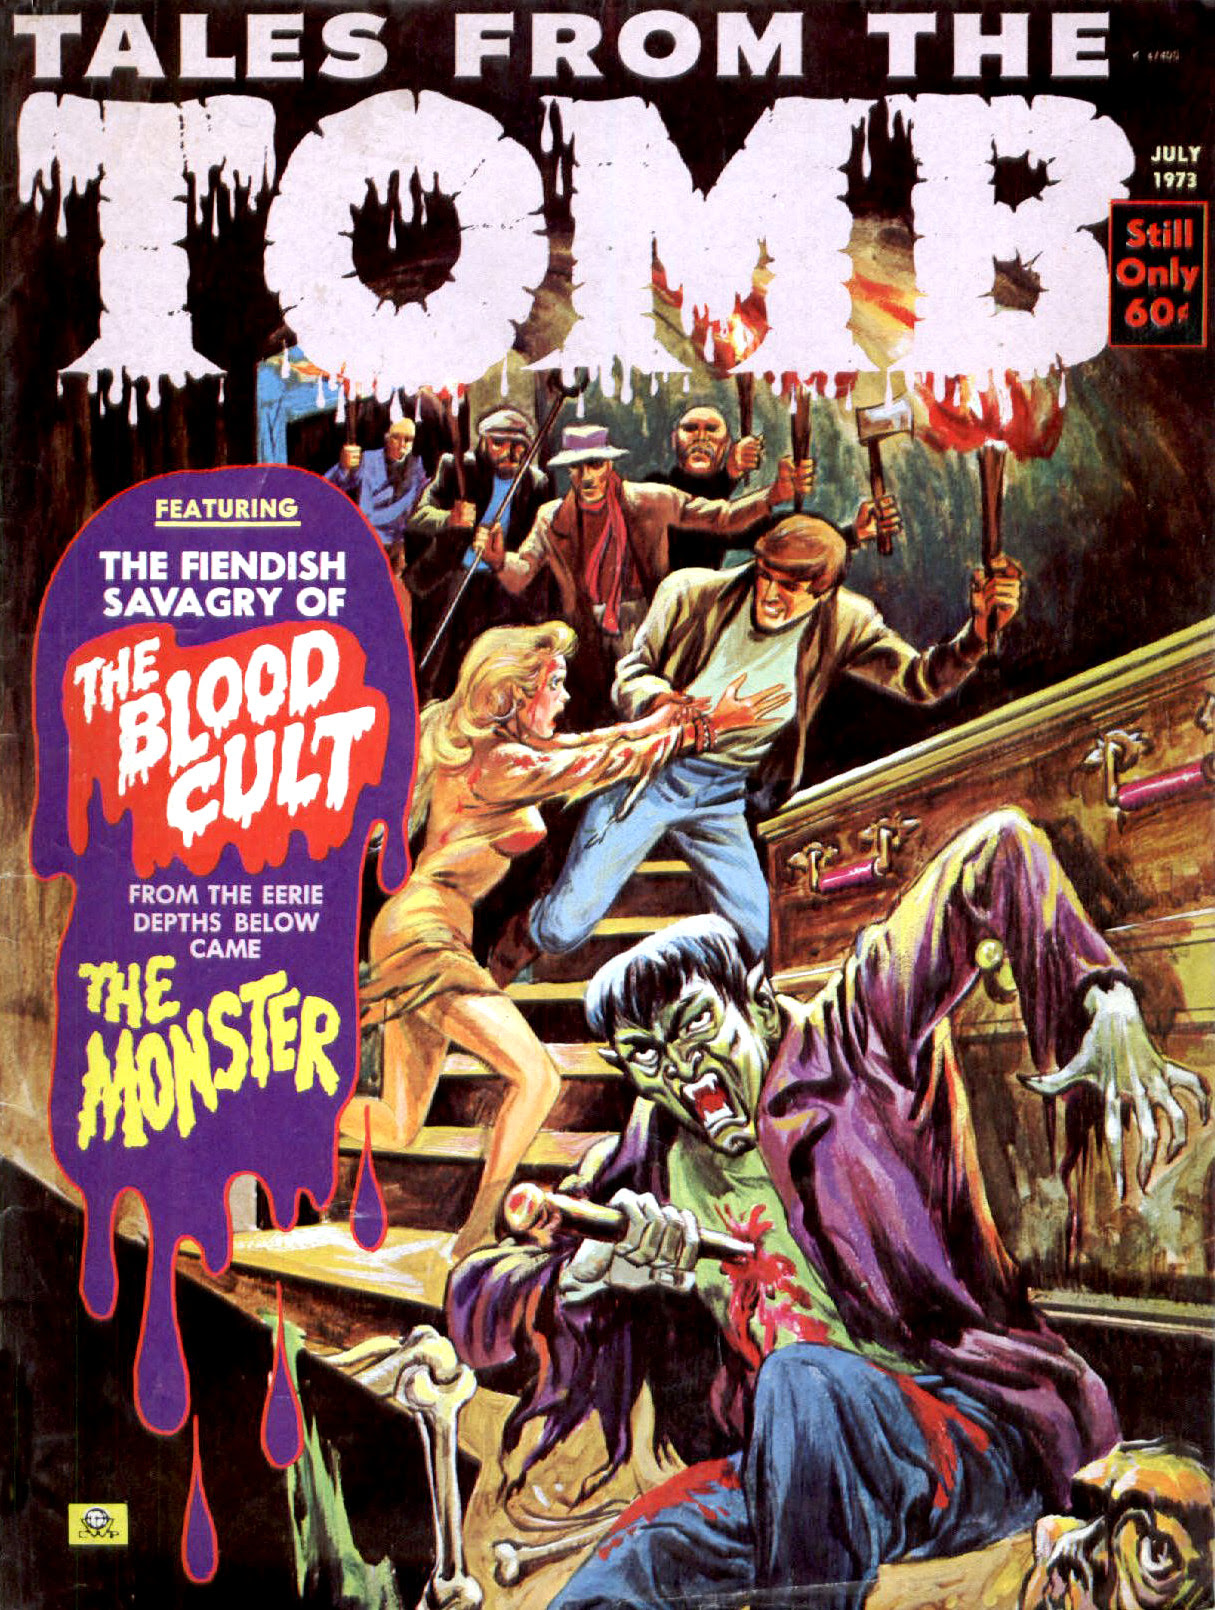 Tales from the Tomb - Vol. 5 #4 (Eerie Publications, 1973)